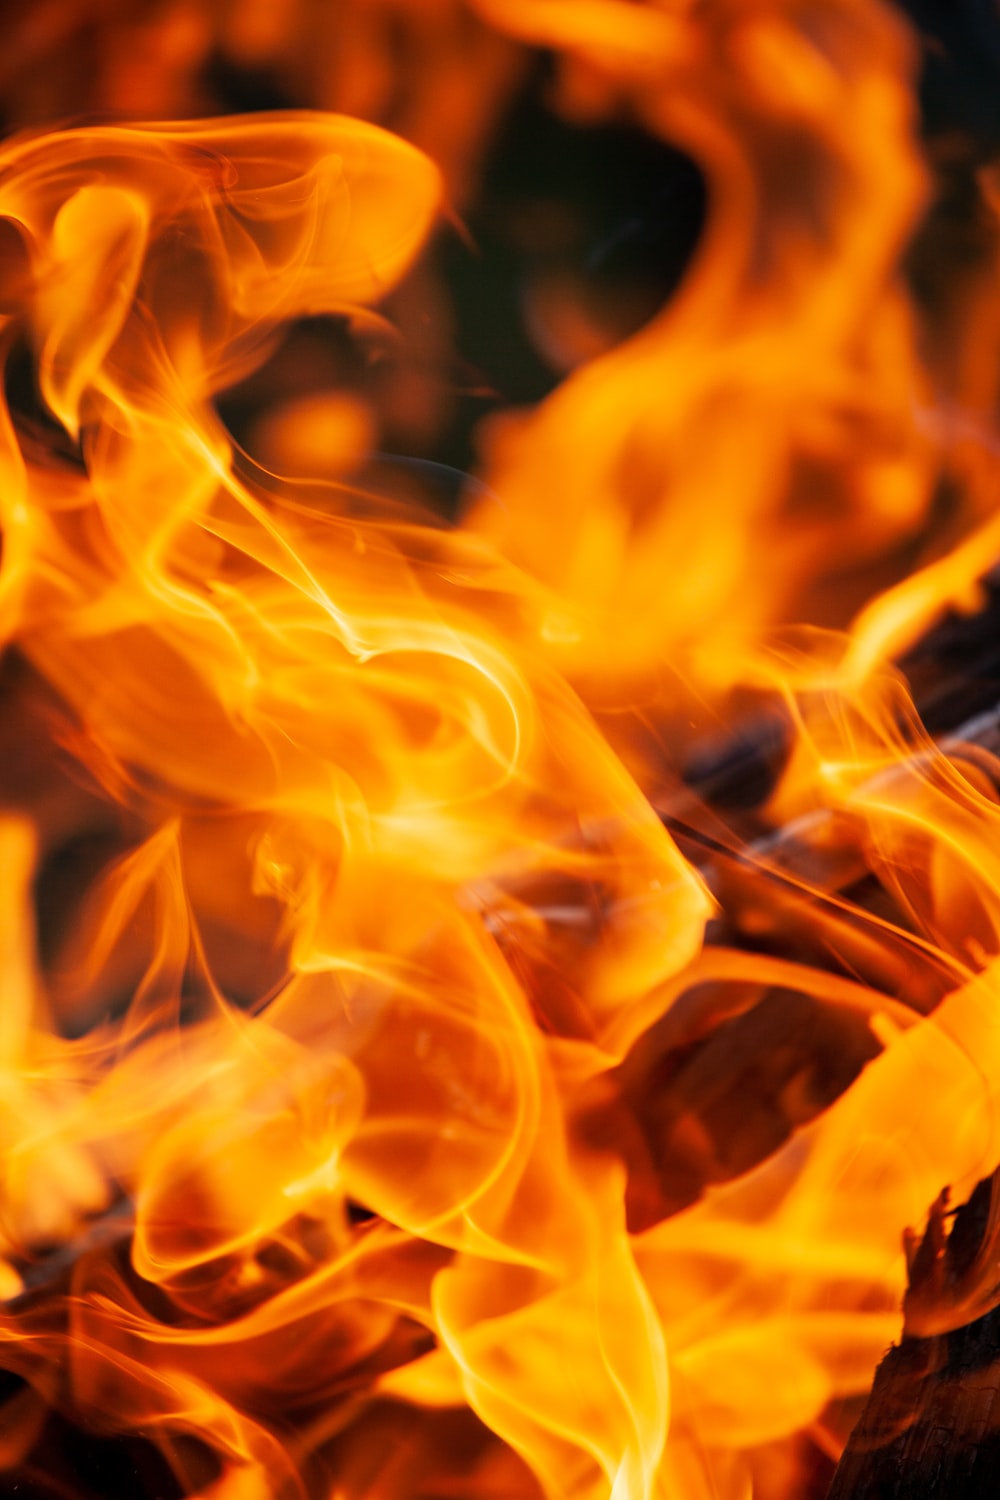 Fire Picture. Download Free Image